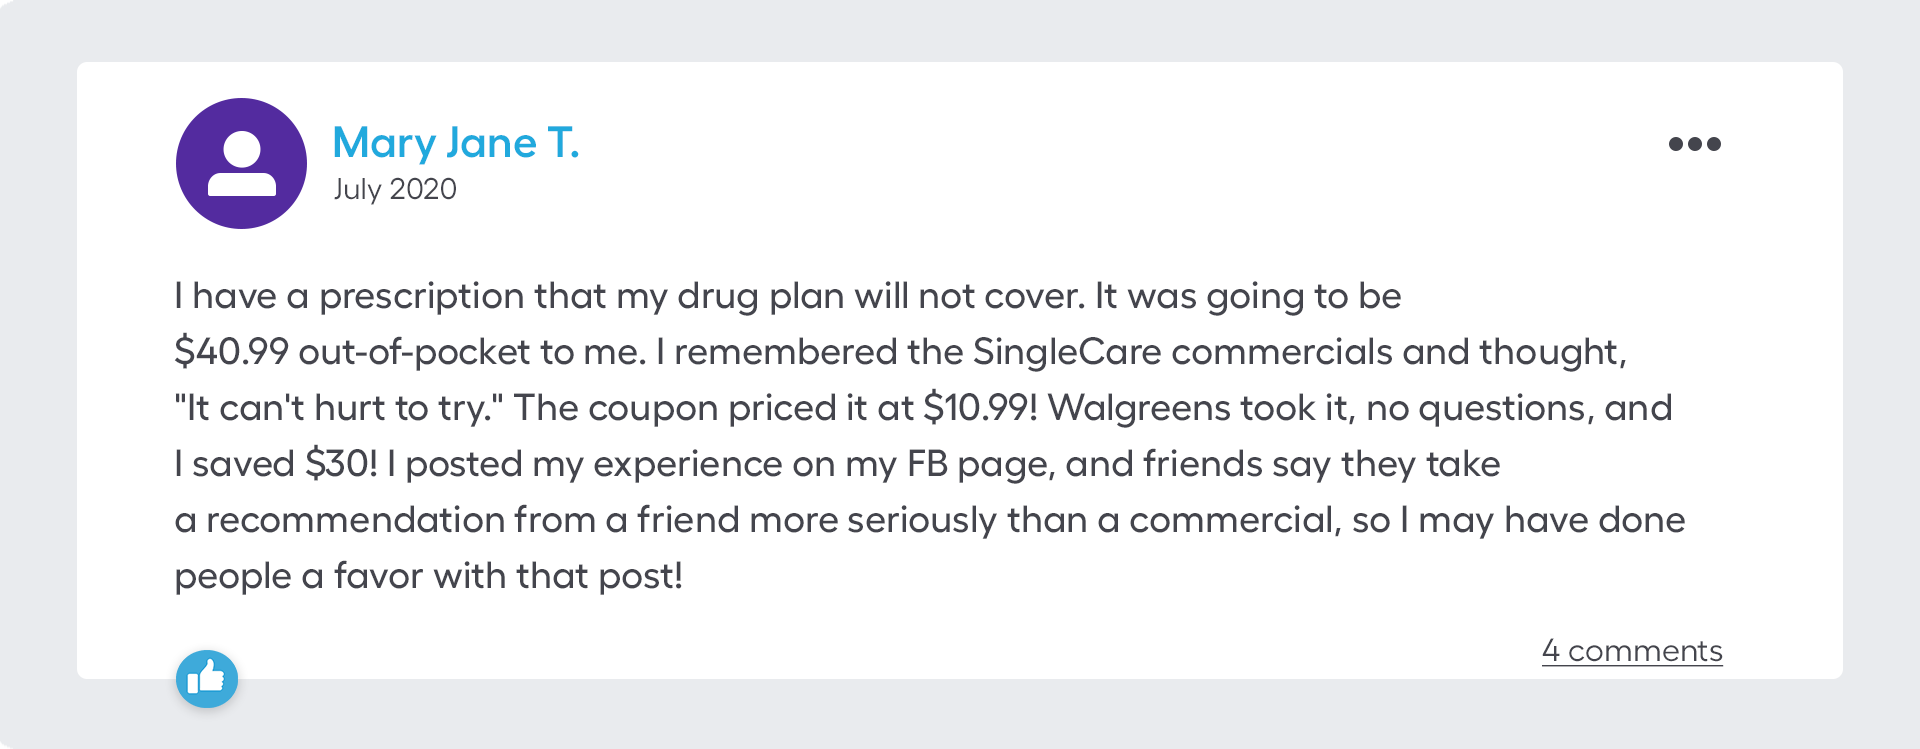 I have a prescription that my drug plan will not cover. It was going to be $40.99 out-of-pocket to me. I remembered the SingleCare commercials and thought, "It can't hurt to try." The coupon priced it at $10.99! Walgreens took it, no questions, and I saved $30! I posted my experience on my FB page, and friends say they take a recommendation from a friend more seriously than a commercial, so I may have done people a favor with that post!